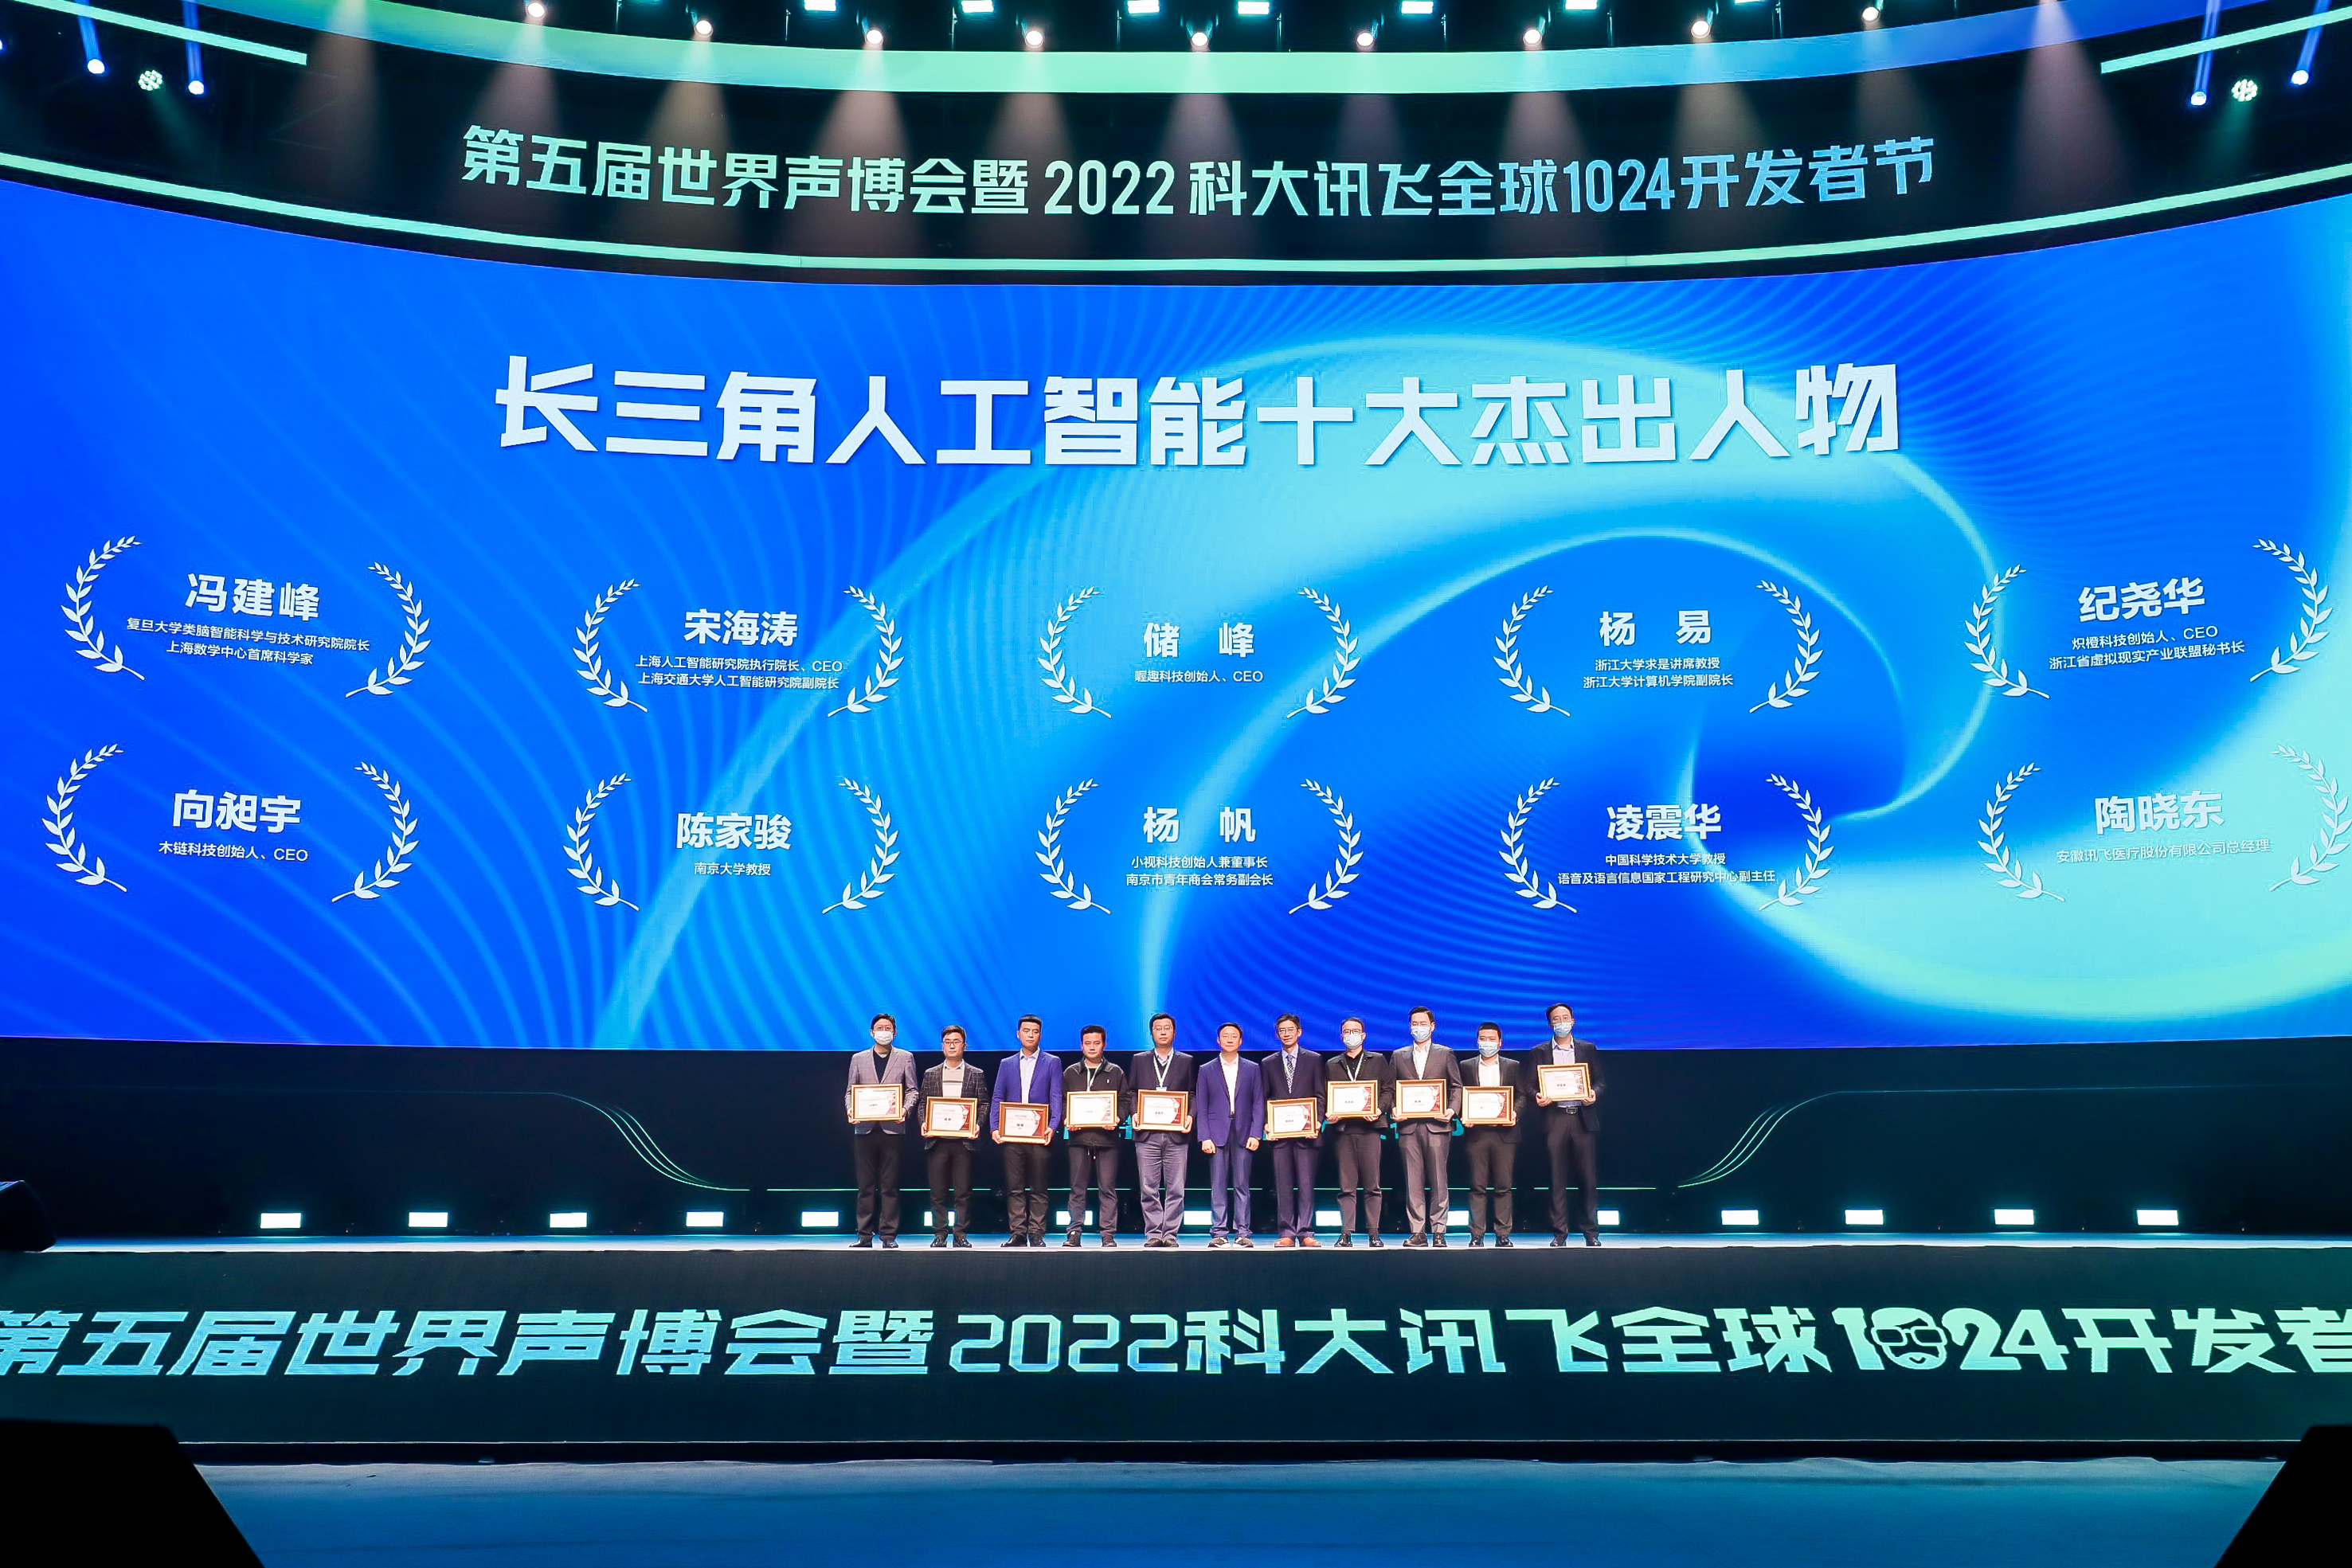 Minivision Technology Yang Fan was awarded the "Top 10 Outstanding Figures" in Artificial Intelligence in the Yangtze River Delta in 2022